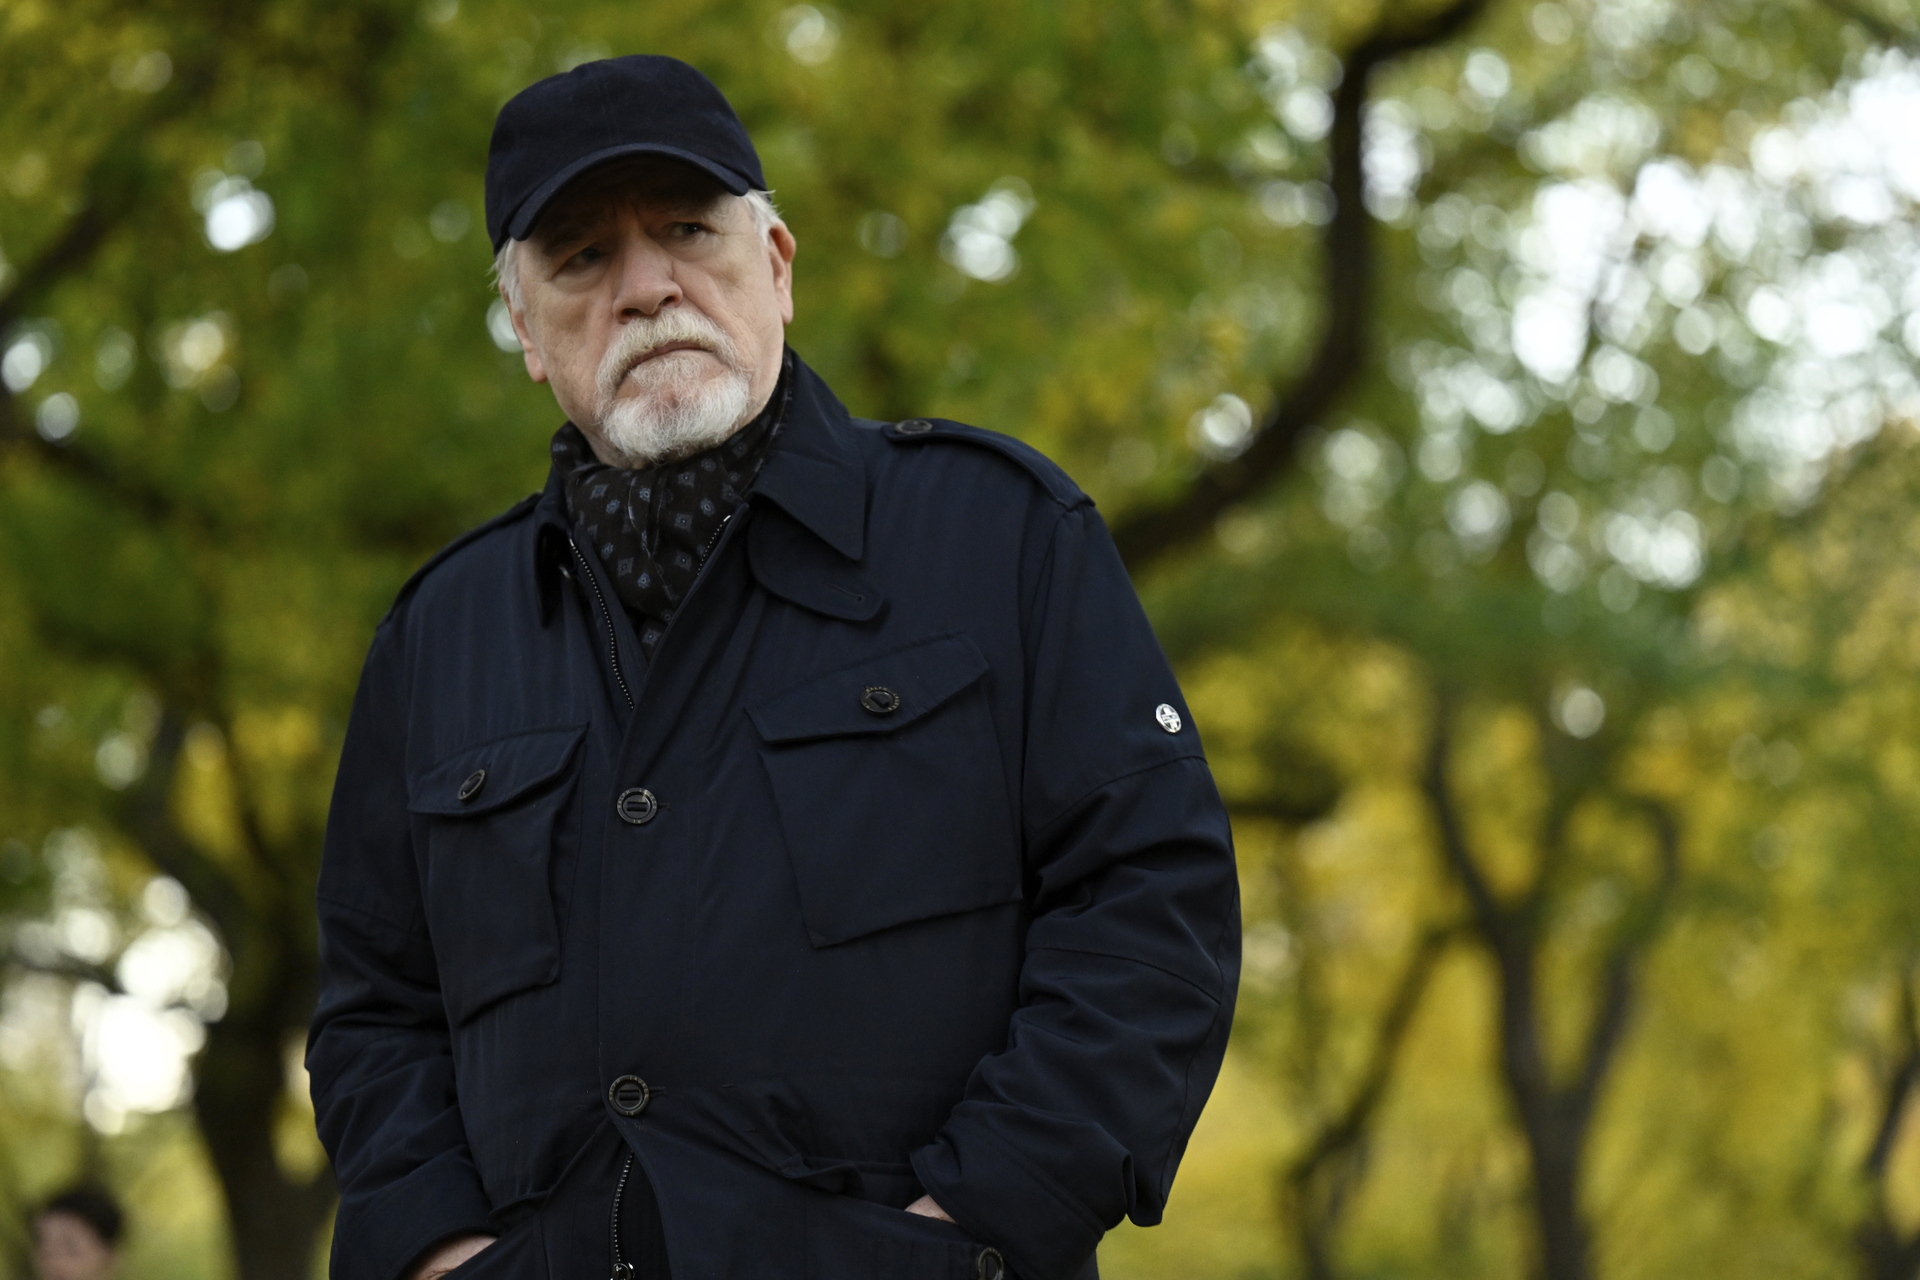 Brian Cox as Logan Roy in HBO’s Succession, wearing an all-black outfit with a black baseball cap and white beard.